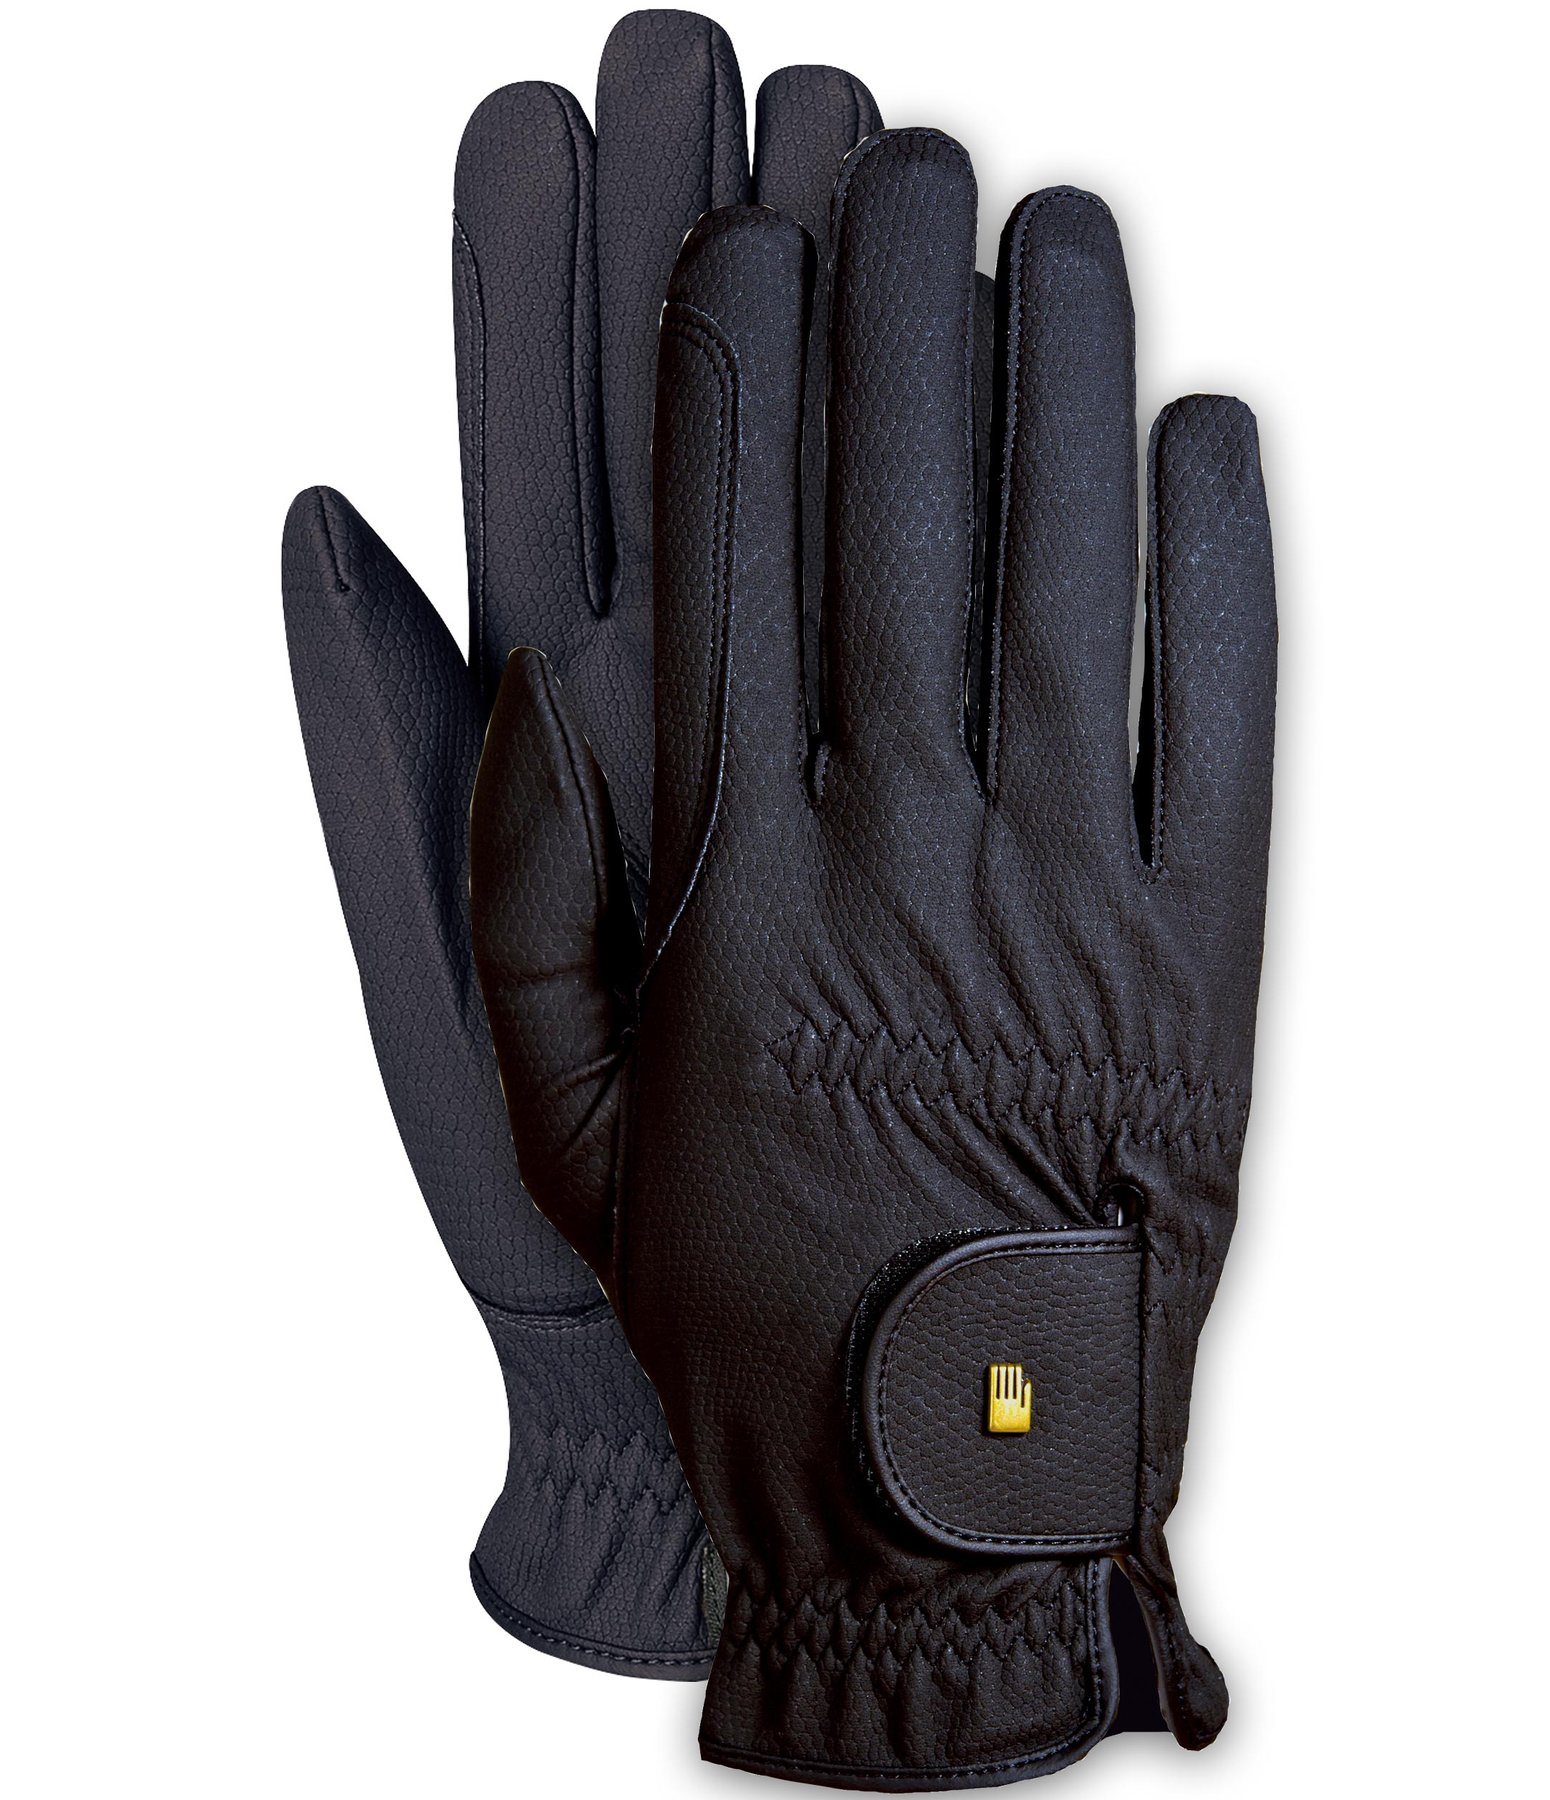 Roeckl Roeck-Grip Unisex Riding Gloves Breathable Elastic and Supple